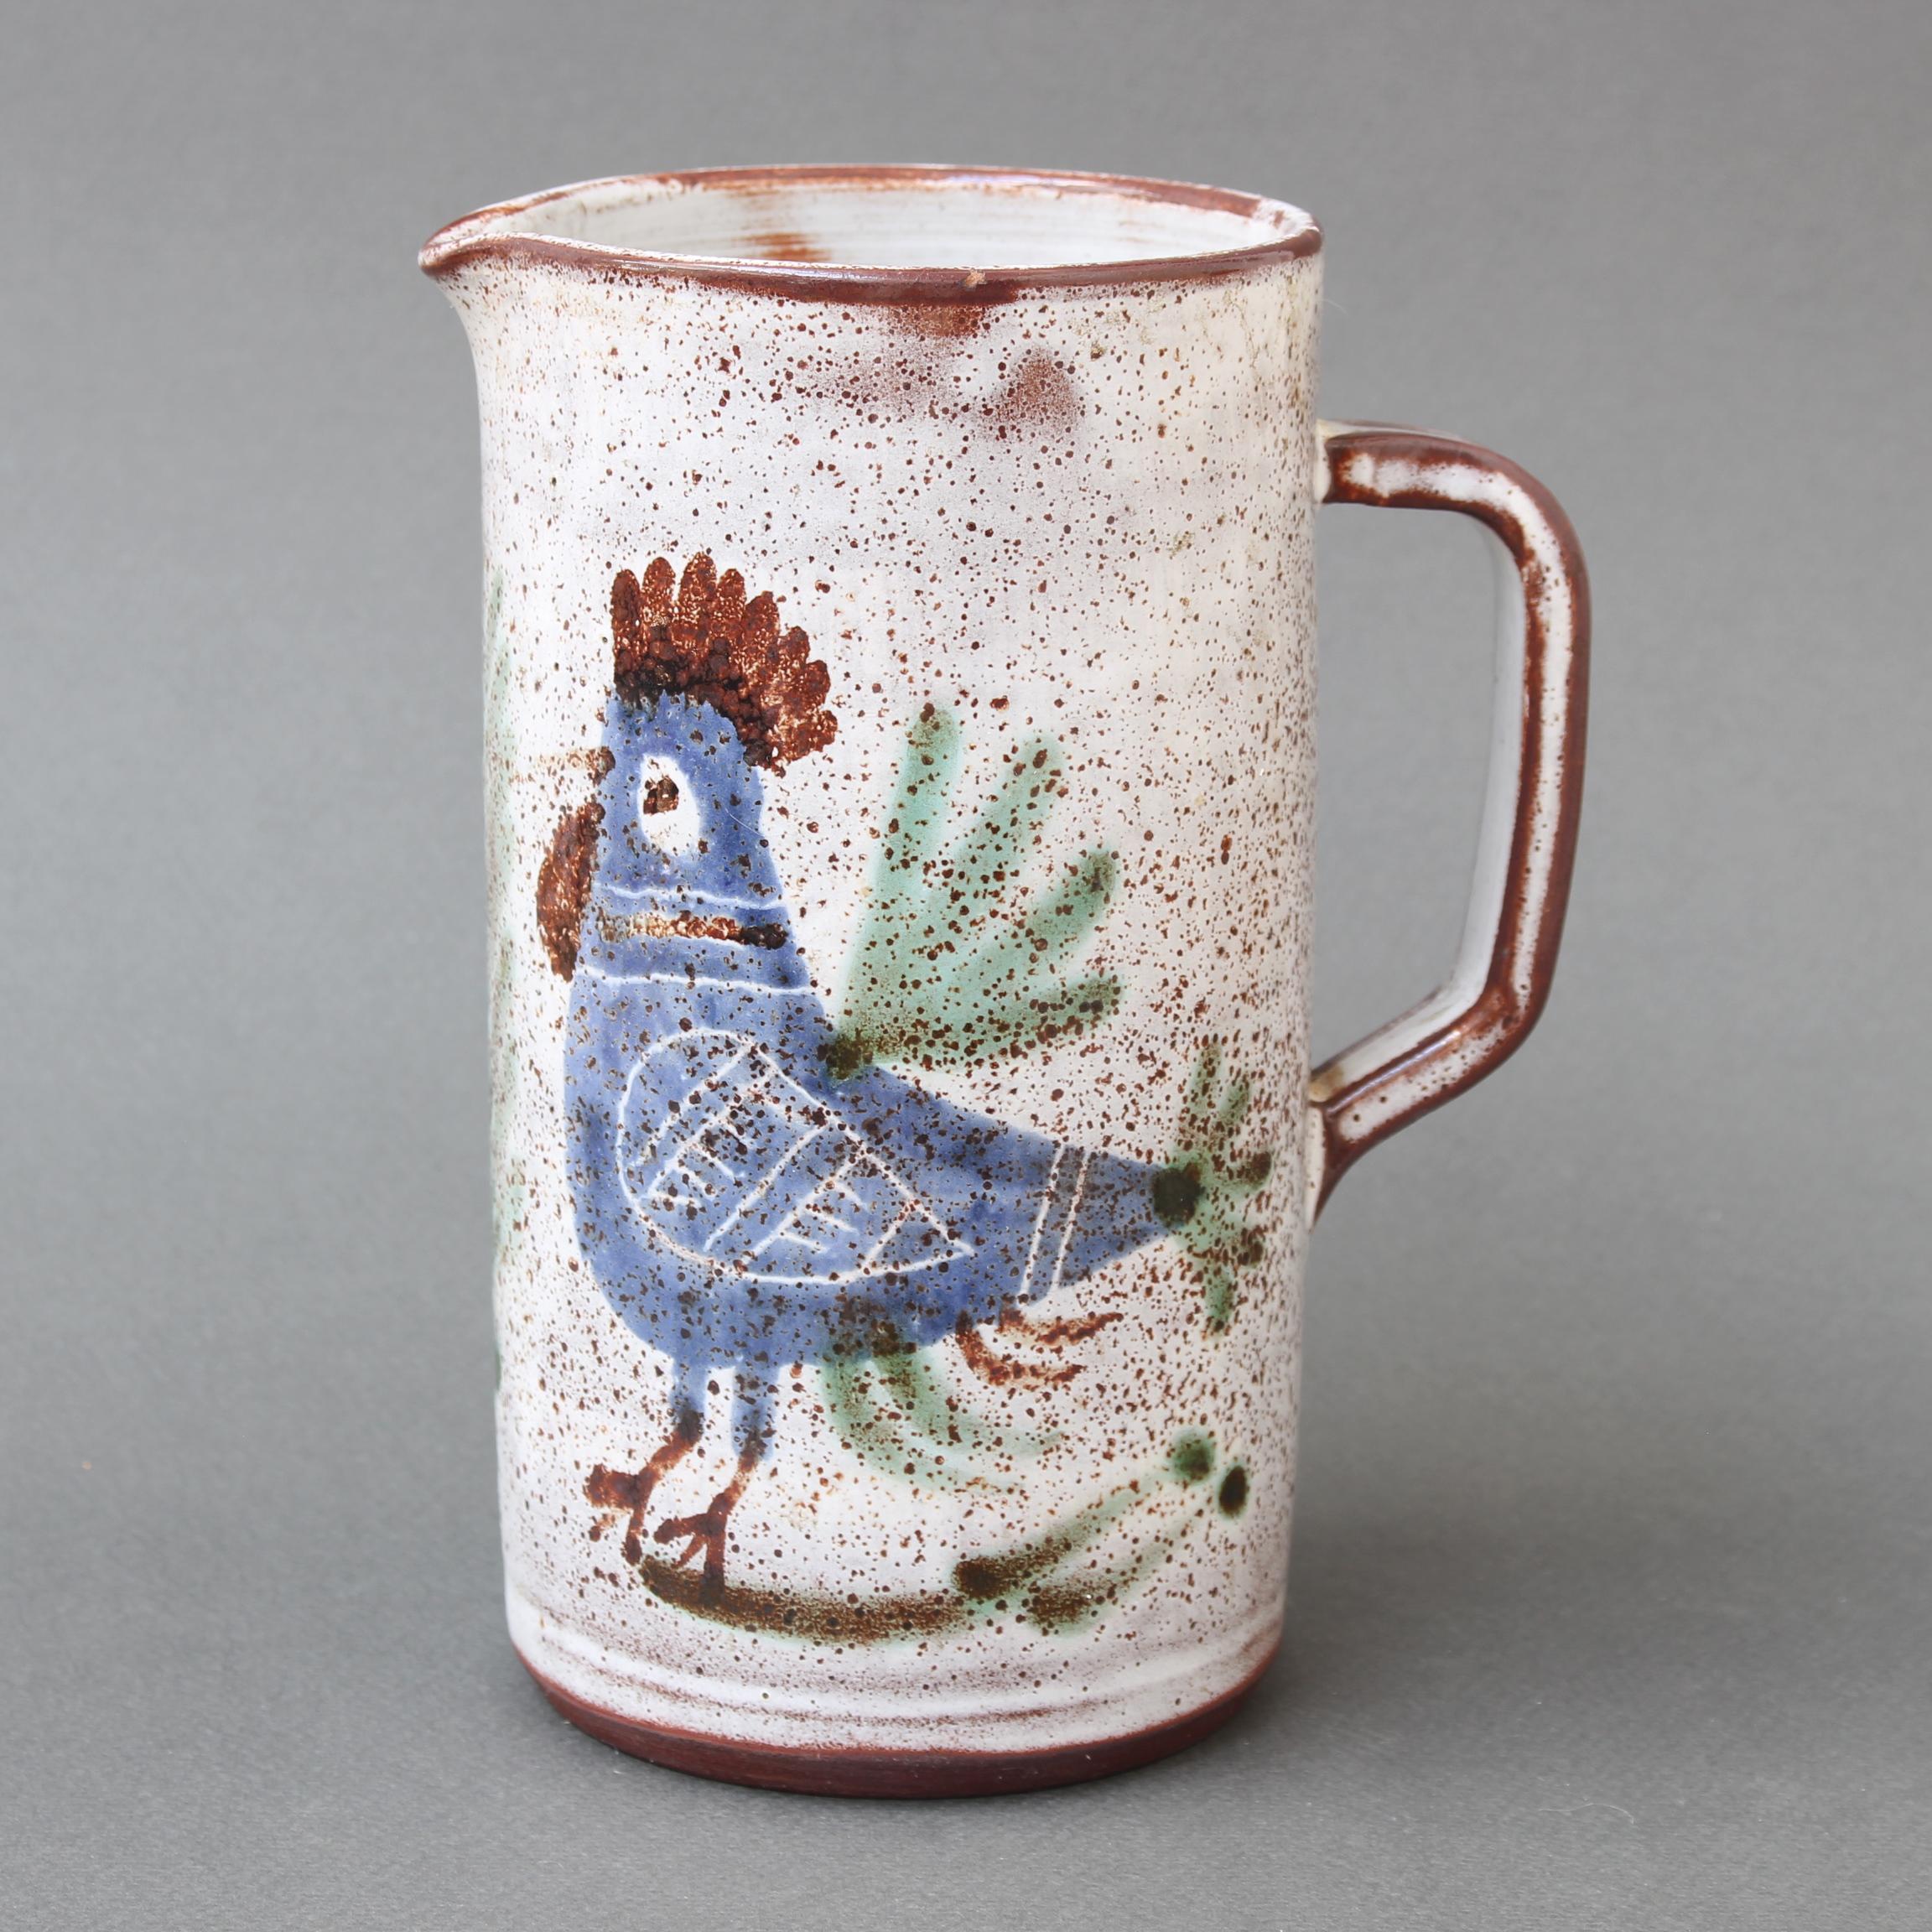 Vintage French ceramic small pitcher by Michel Barbier (circa 1960s). A charming, rustic ceramic pitcher with ear-shaped handle and a small spout on the lip. A creamy white glaze with mottled reddish-brown patches form the base of the piece that